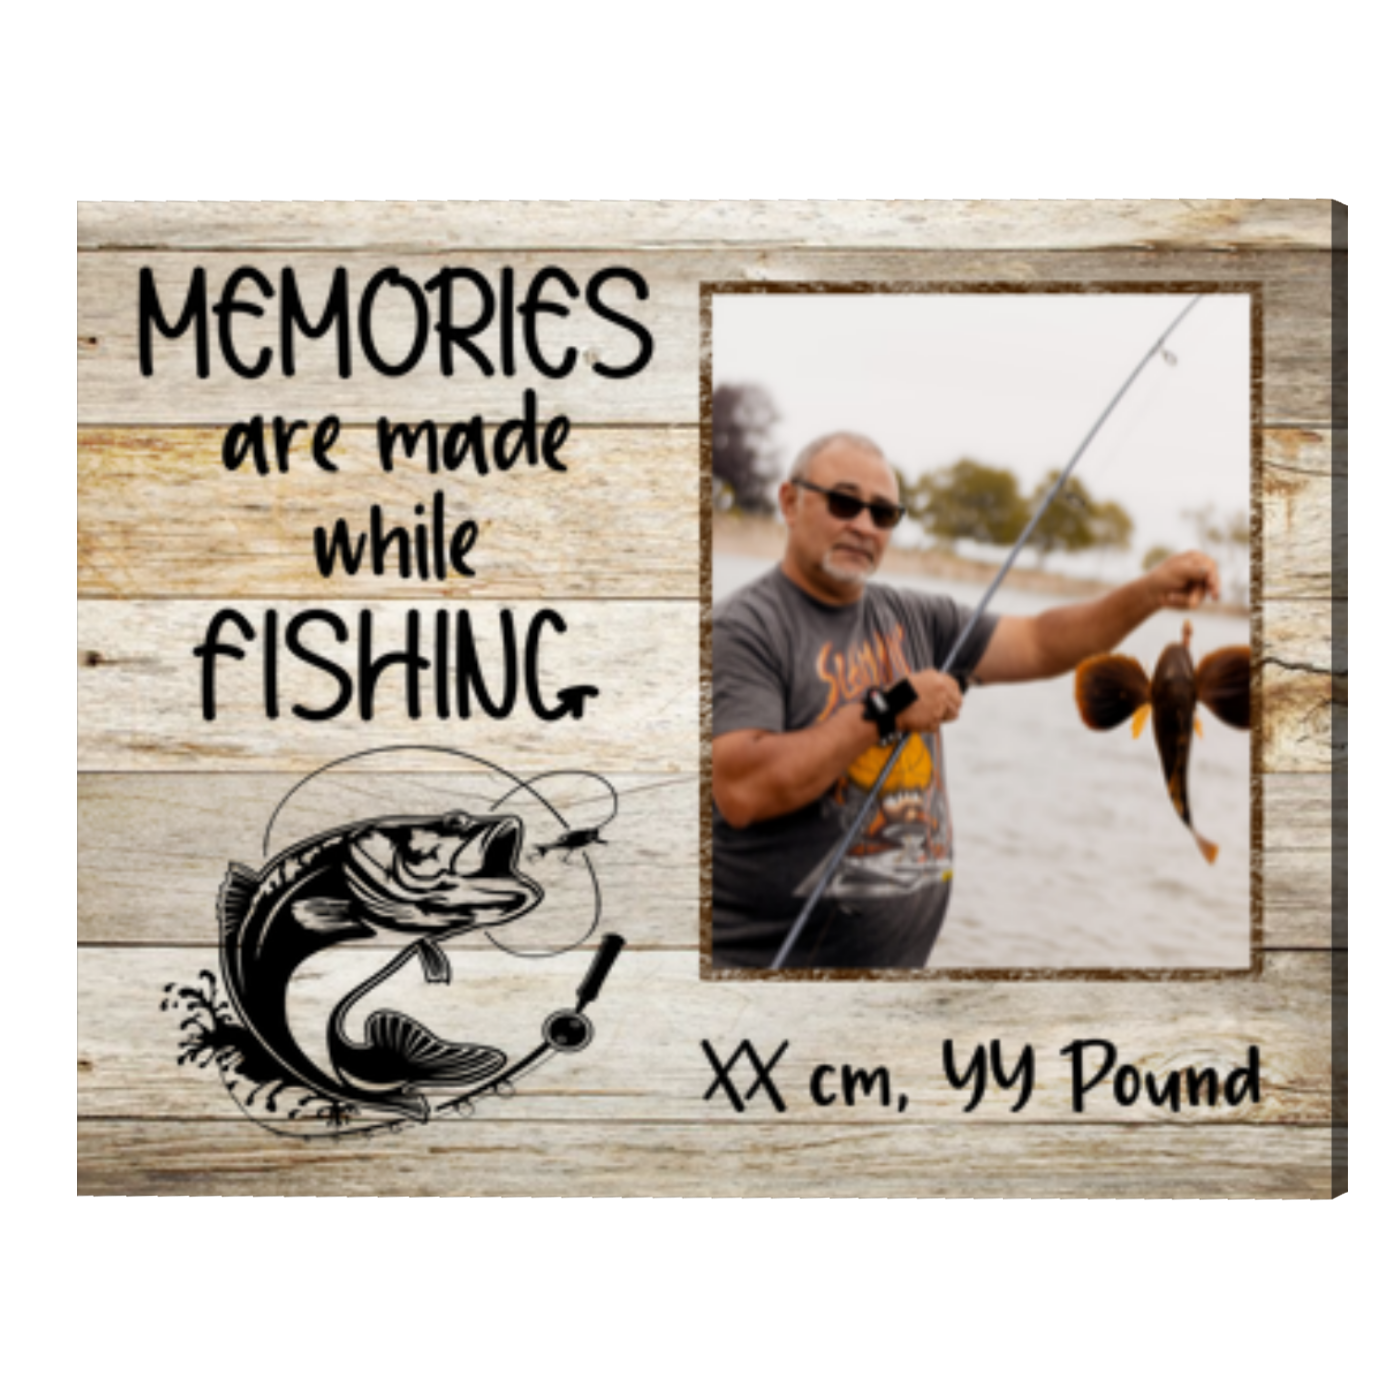 Custom Best Gifts For Fisherman, Fishing Gifts For Dad, Man Cave Wall  Decor, Fishing Gift Ideas